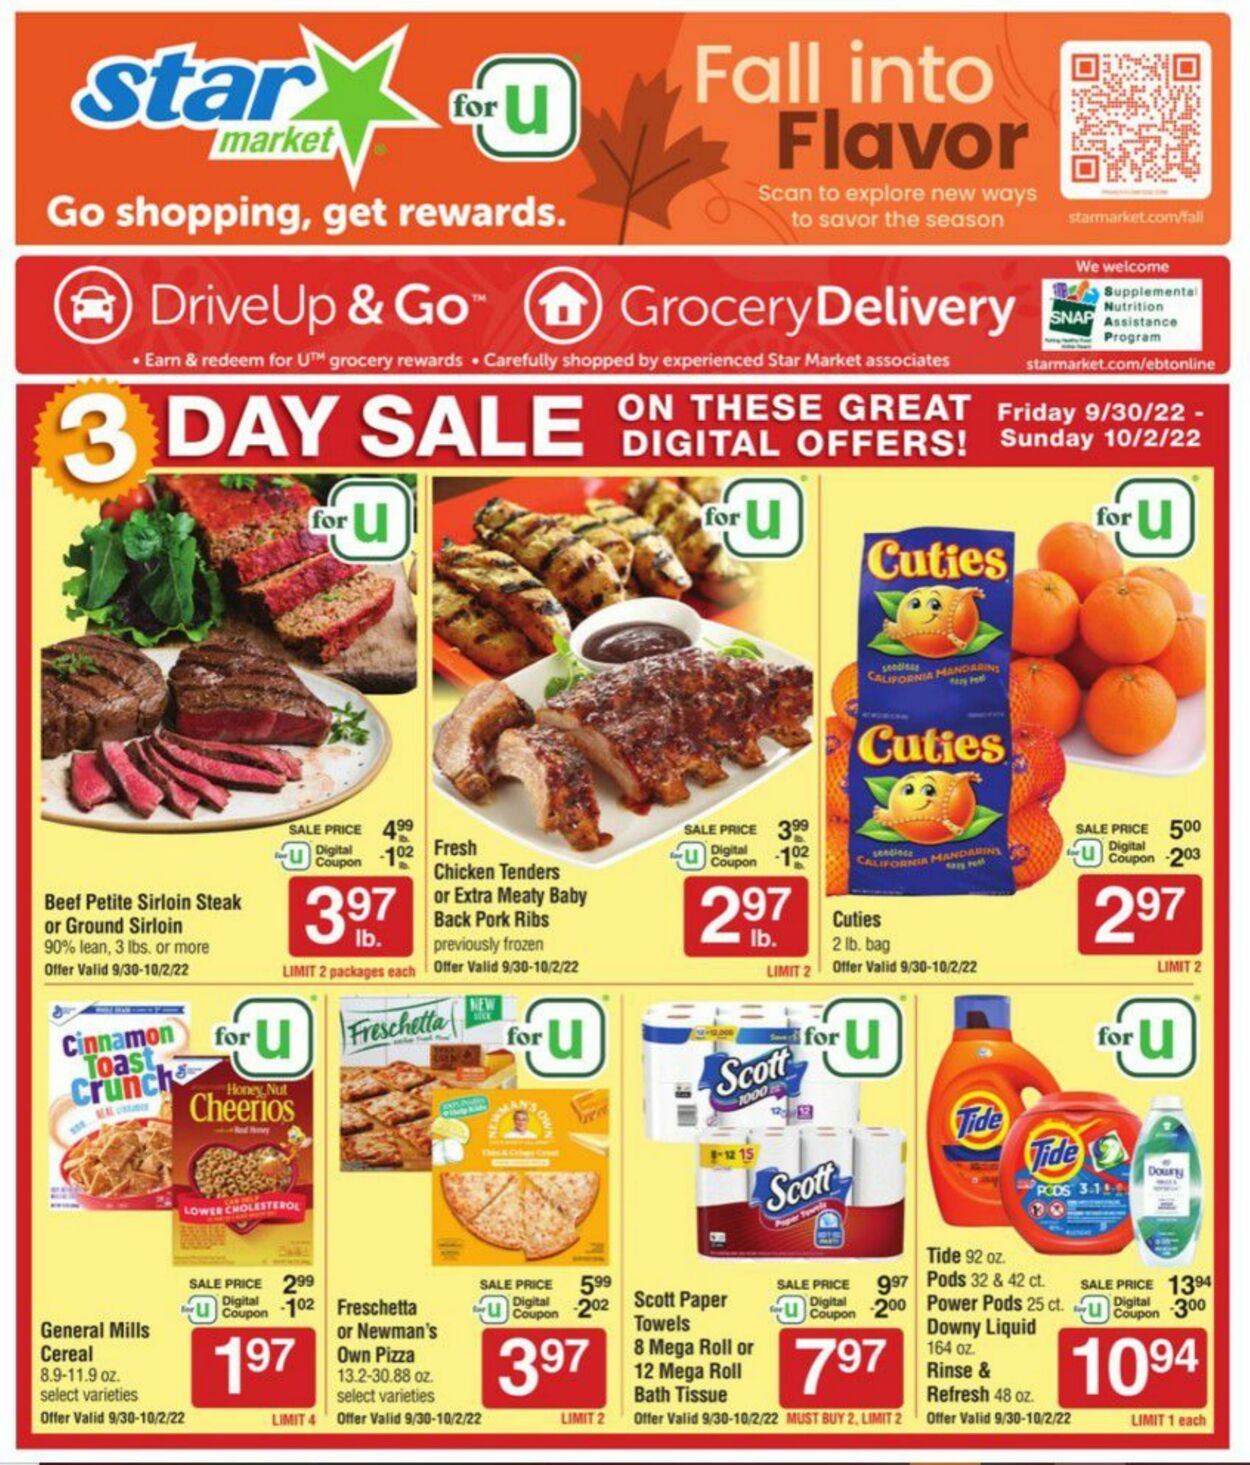 Star Markets Promotional weekly ads